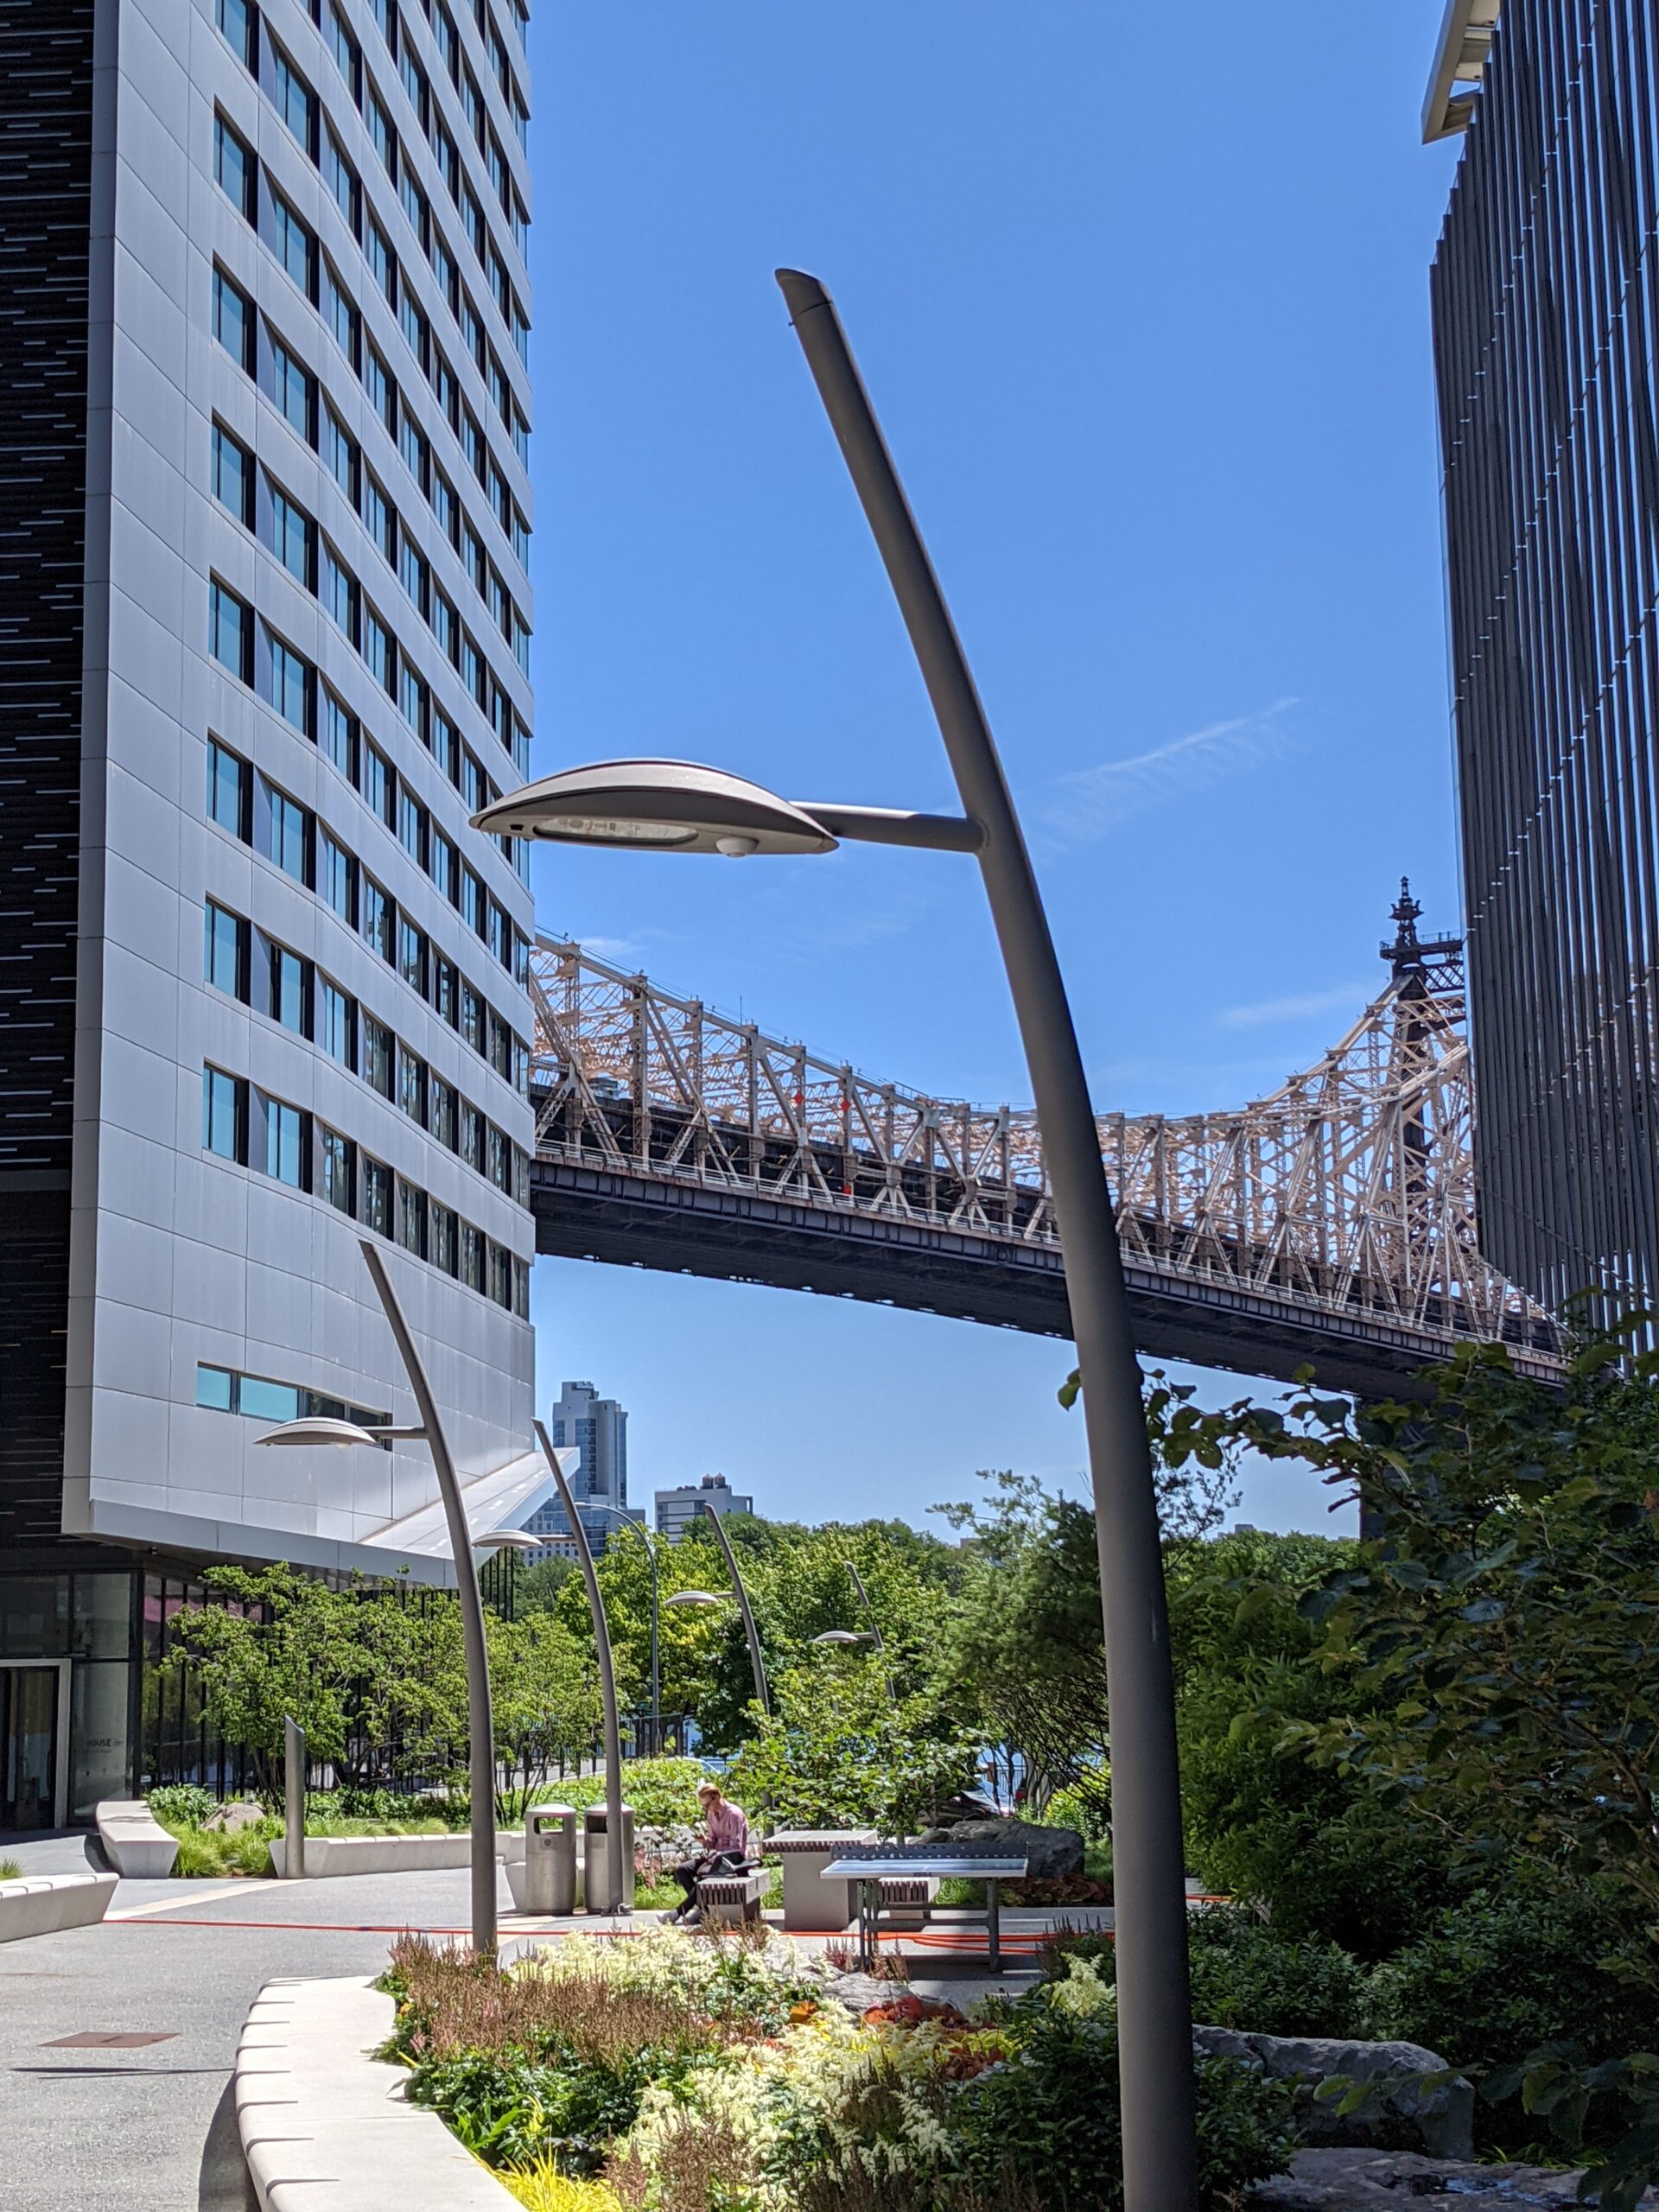 a lamppost, modern buildings and queensboro bridge visible between them